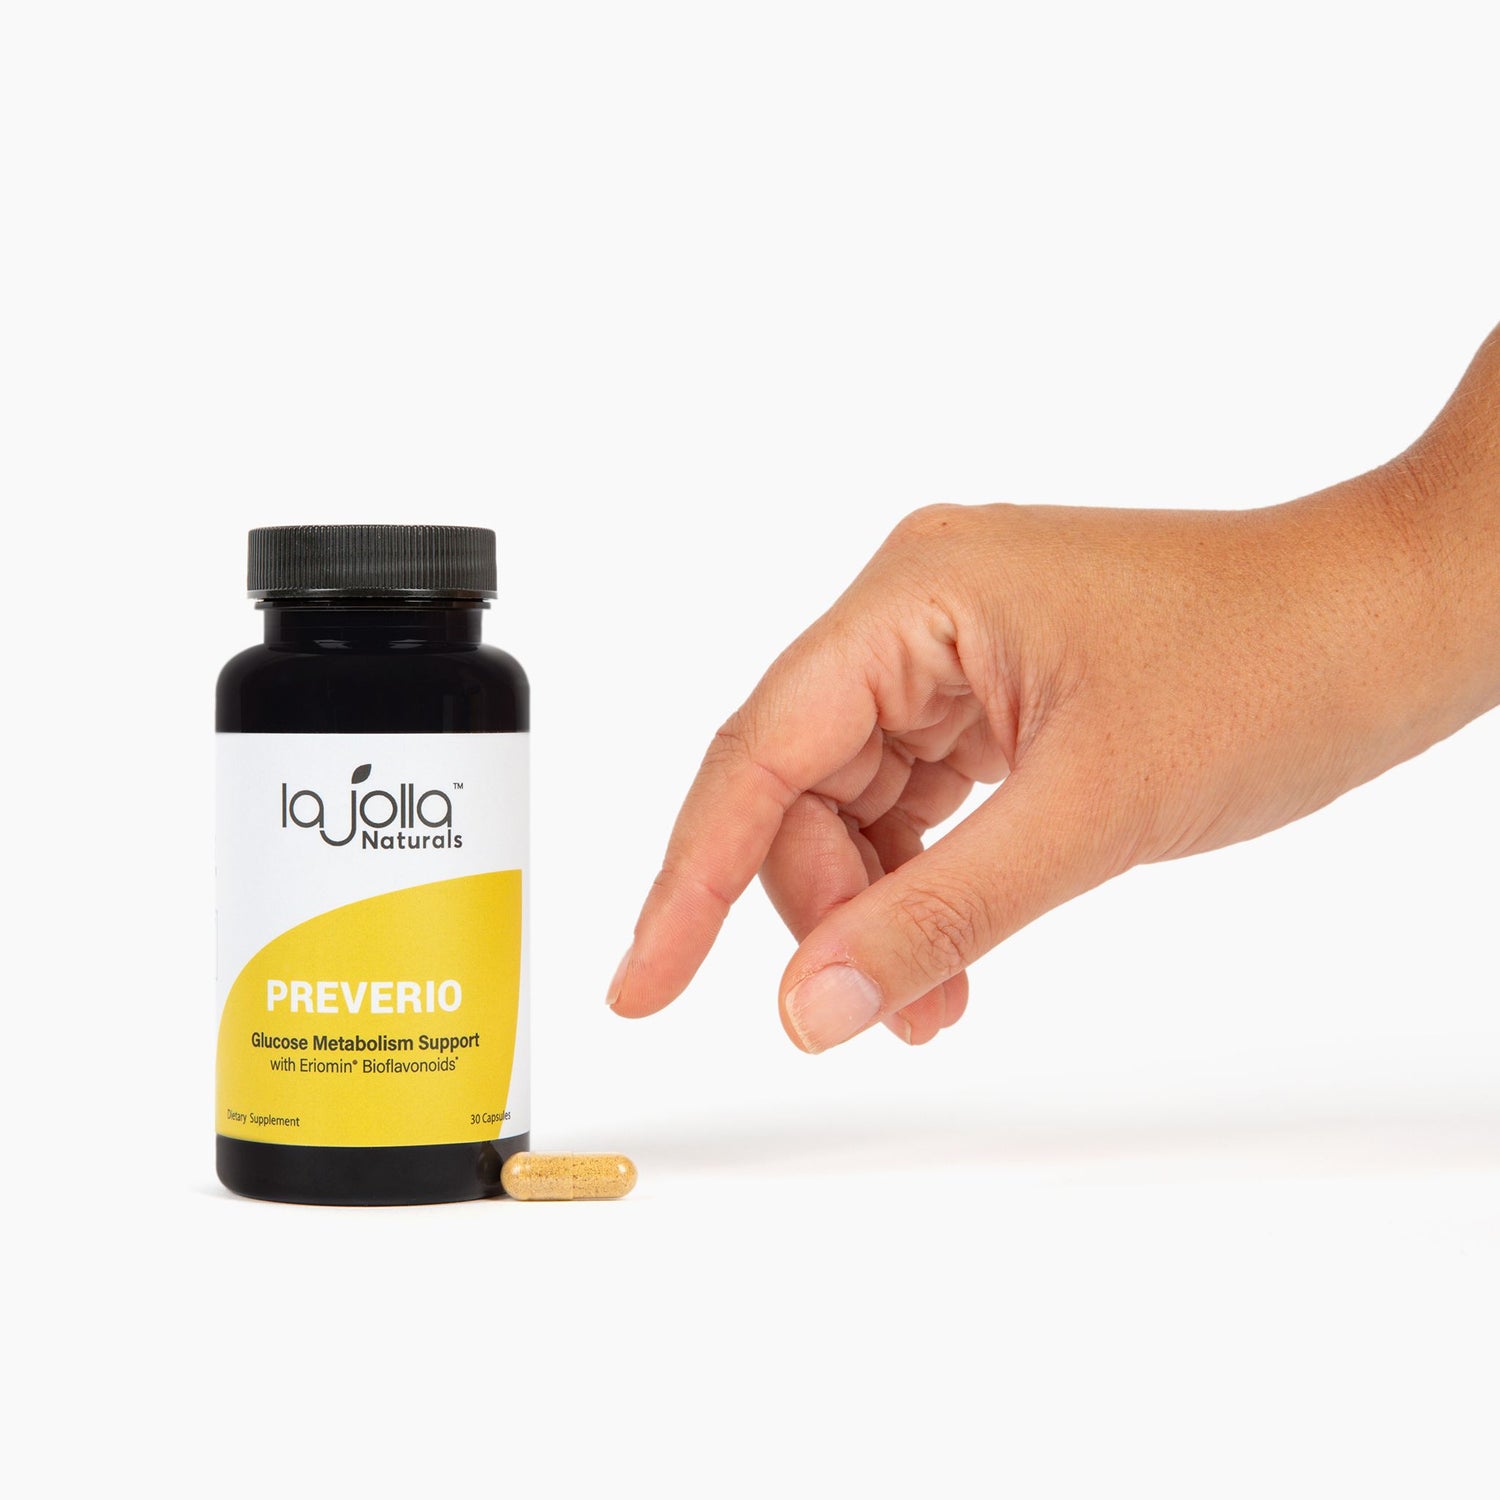 Bottle of Preverio Glucose Metabolism Support with a hand coming in from the right to pick up a capsule next to the bottle